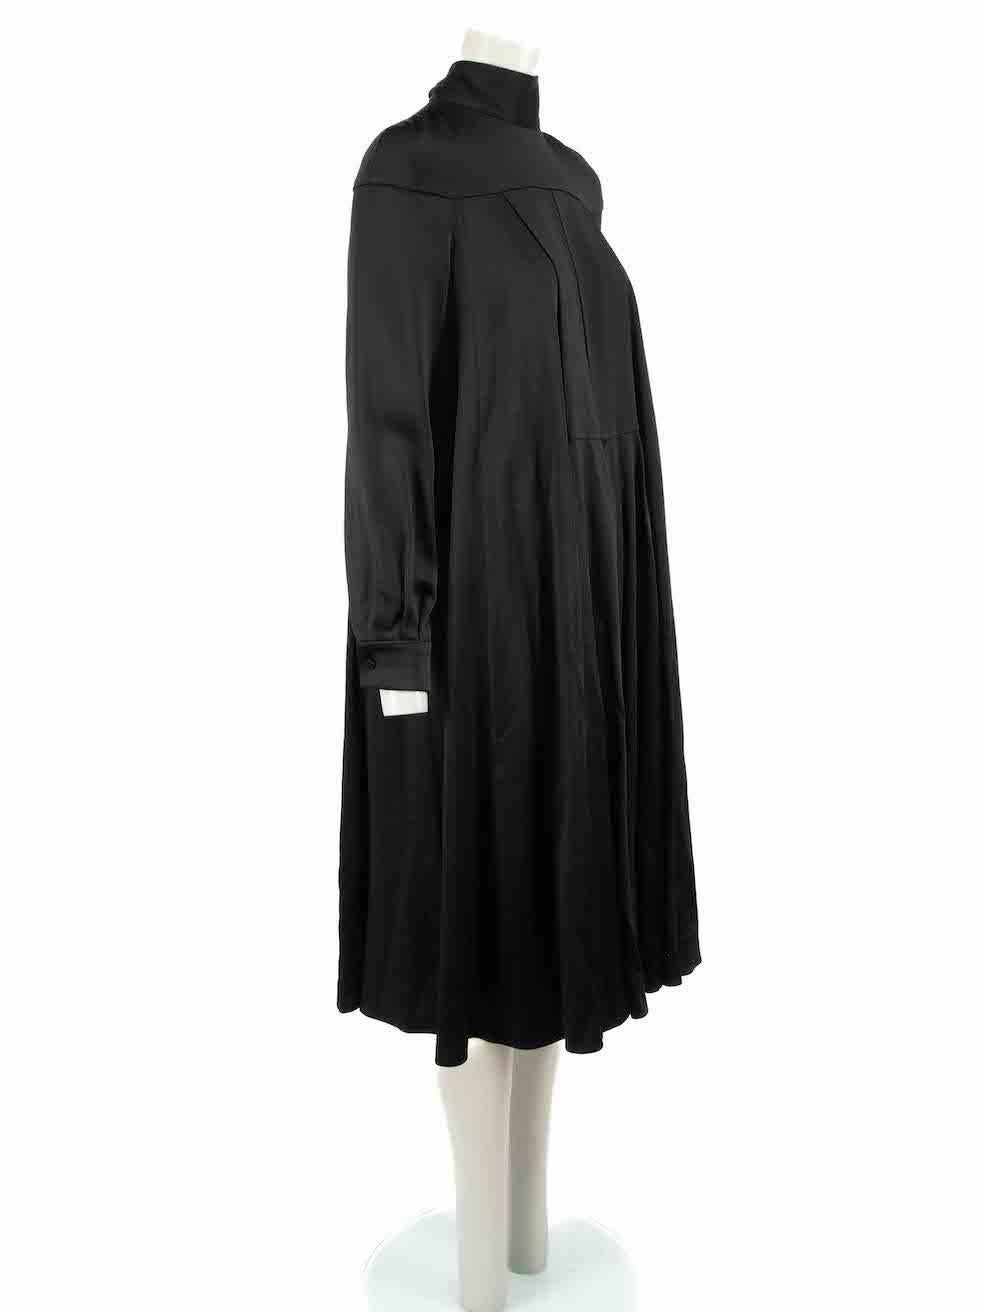 CONDITION is Very good. Hardly any visible wear to dress is evident on this used Valentino designer resale item.
 
 Details:
 Black
 Viscose
 Dress
 Long sleeves
 Maxi
 Neck tie detais 
Front pleat detail 
Back zip and hook fastening 
Made in